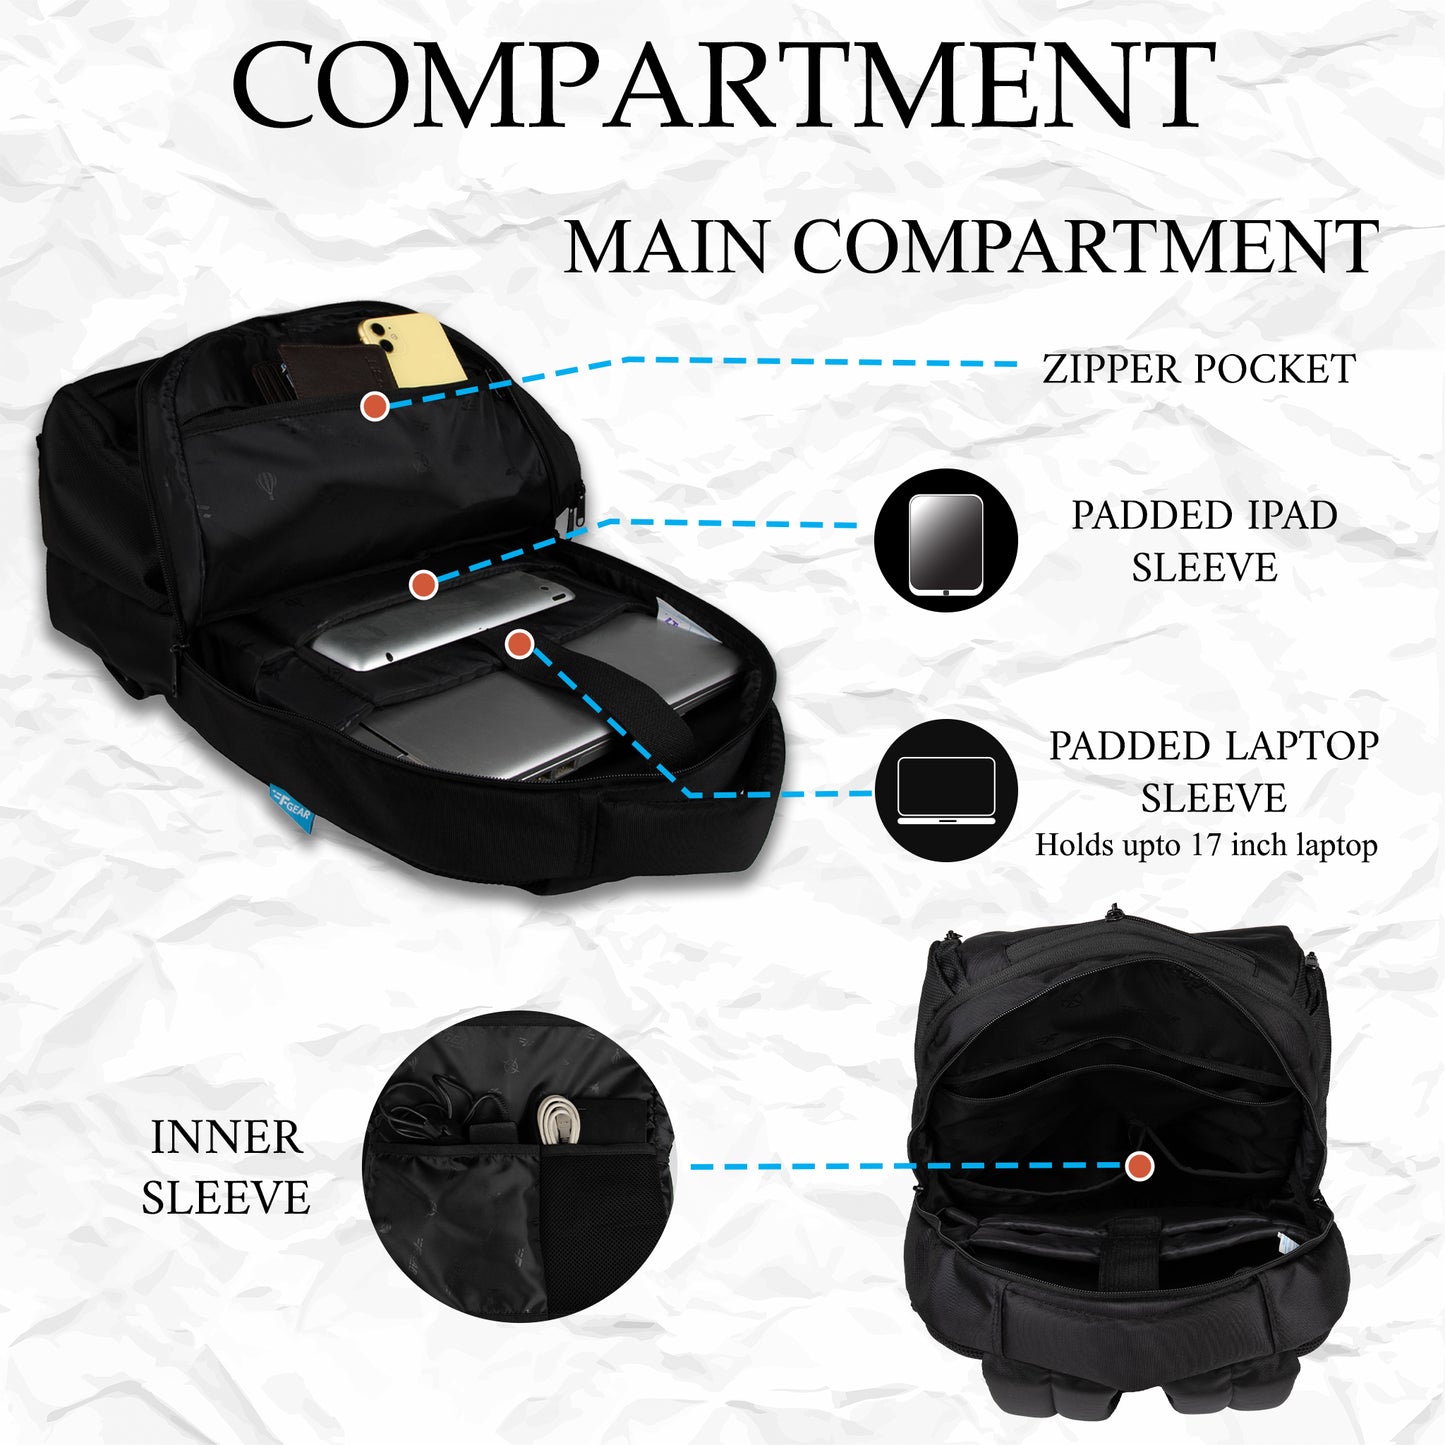 Helicon 30L Black Laptop Backpack